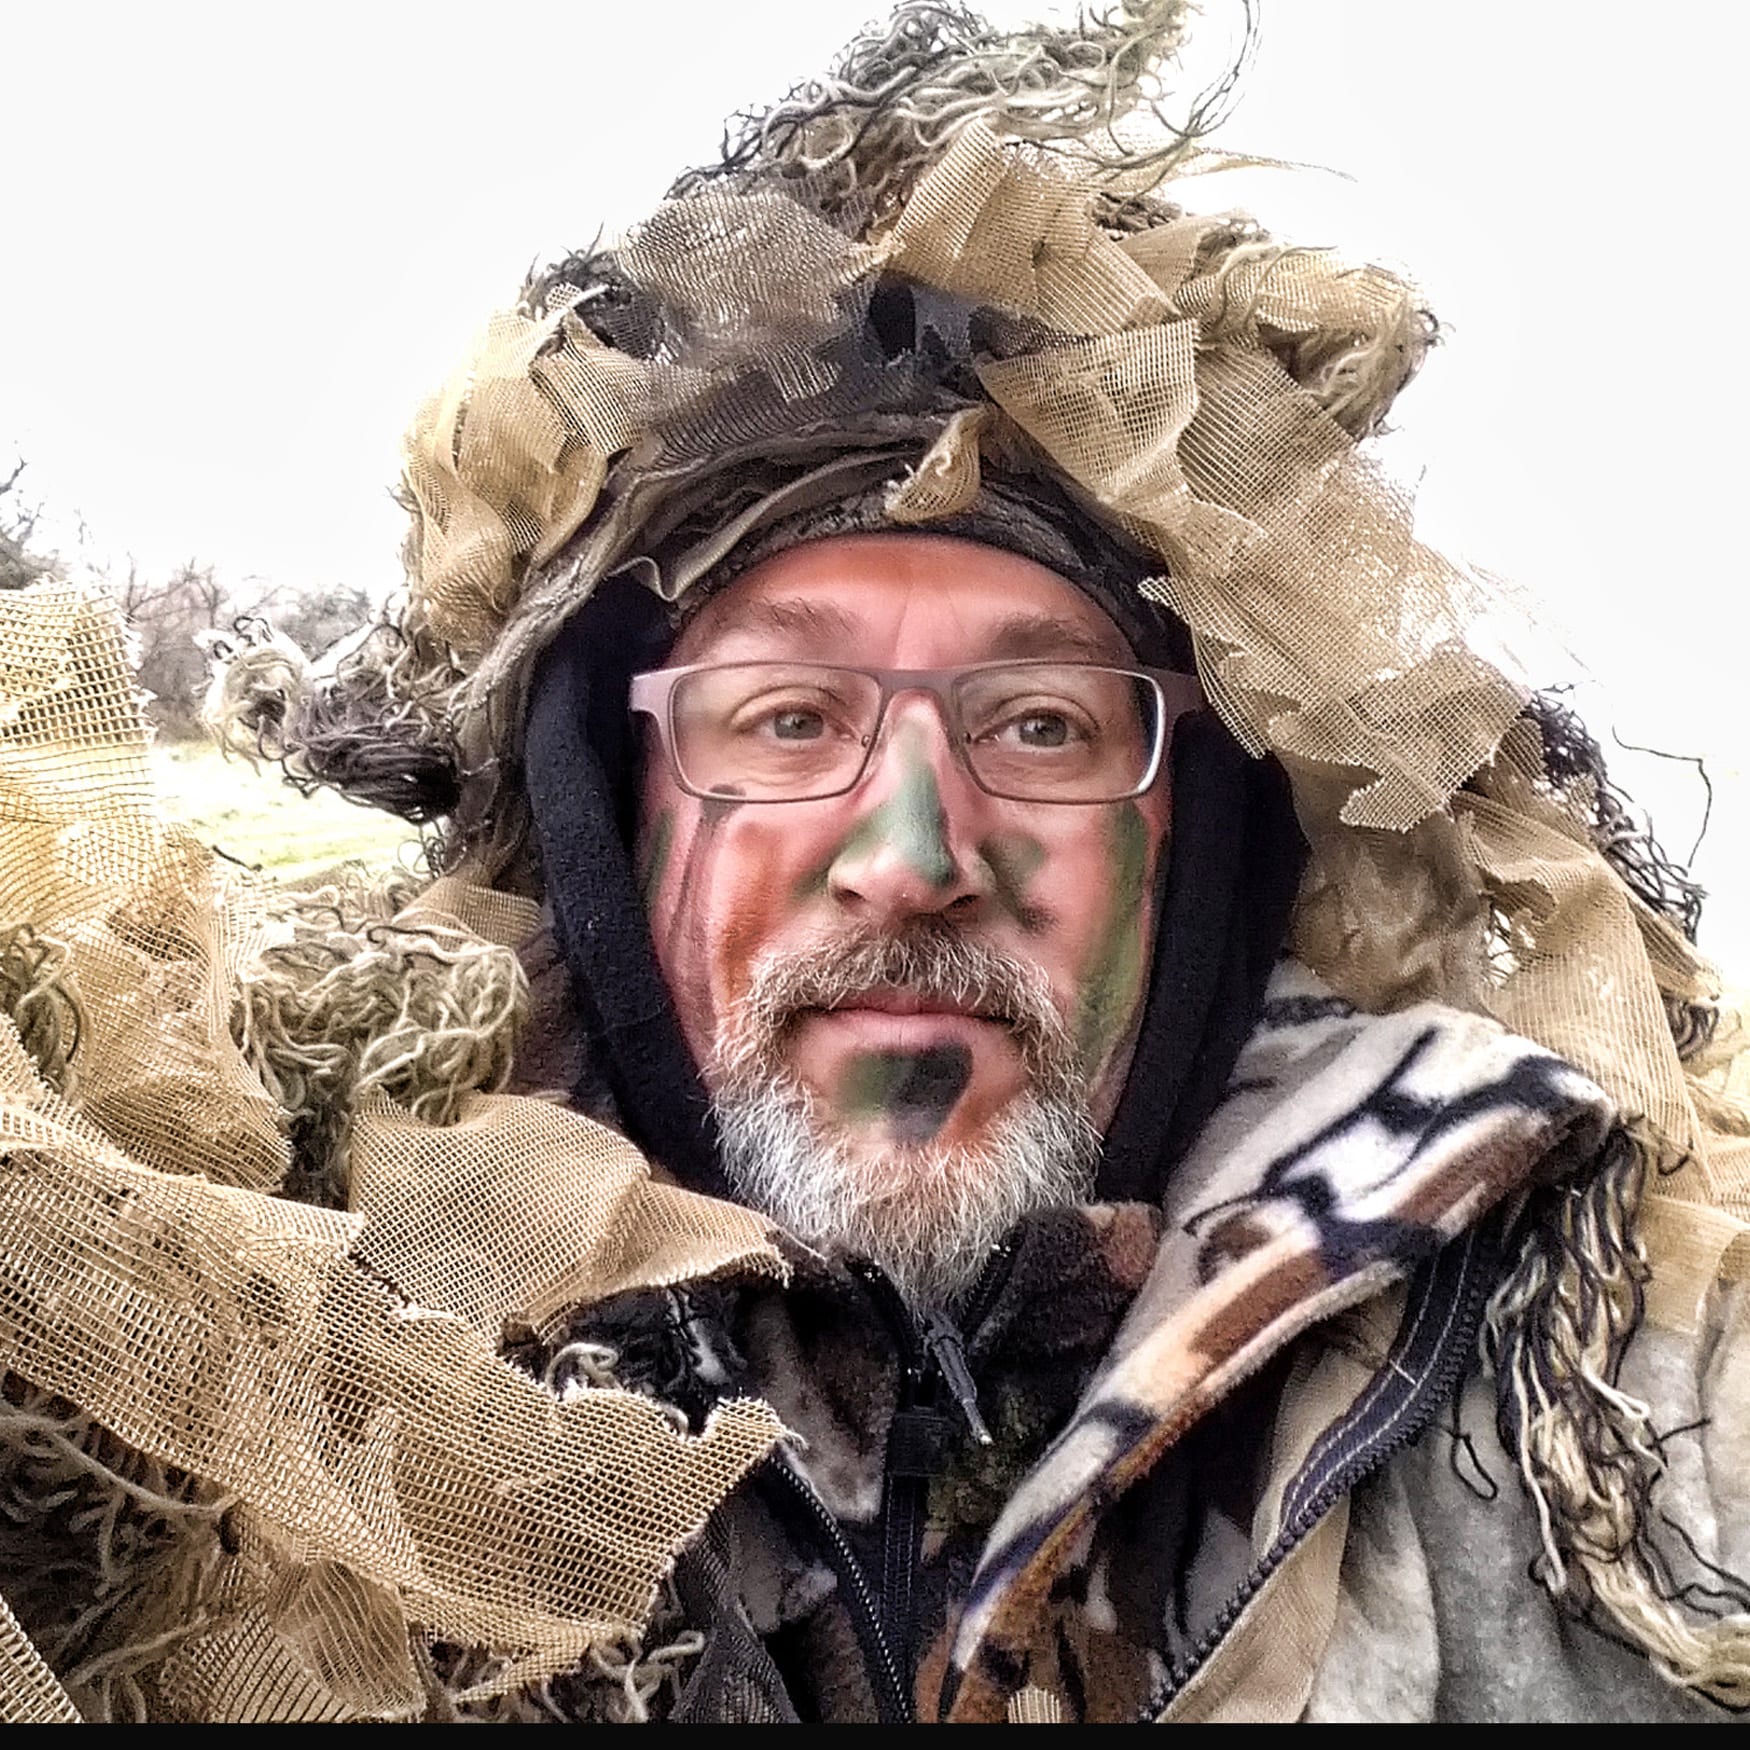 hunter with camo paint on his face in a ghillie suit